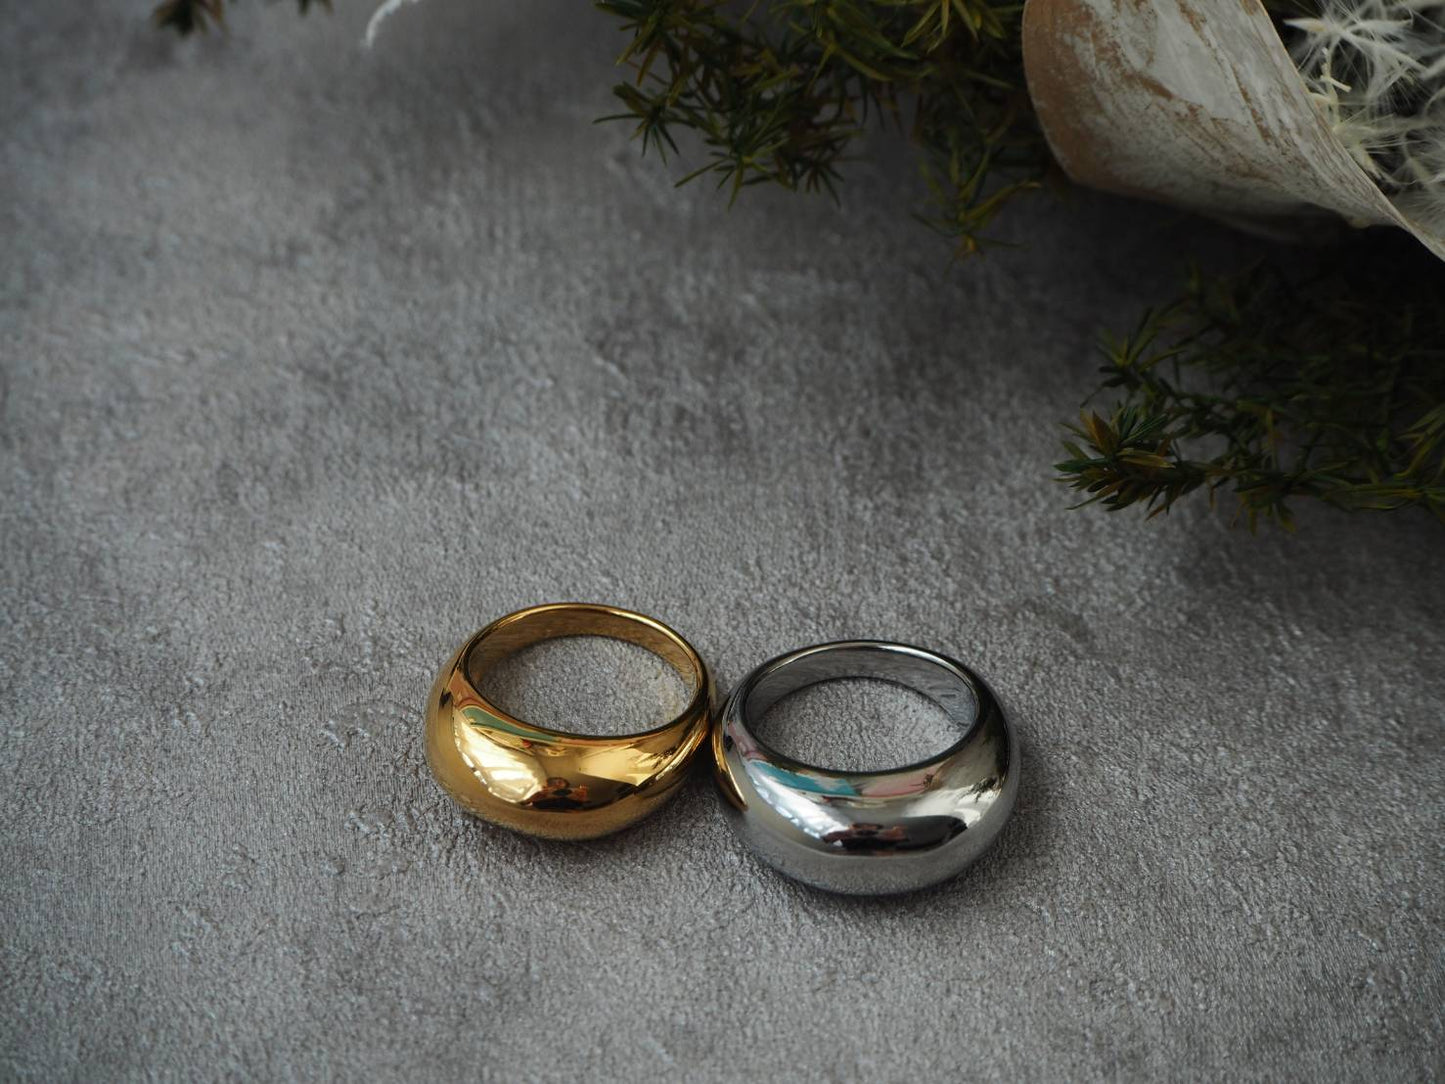 Plump accent rings